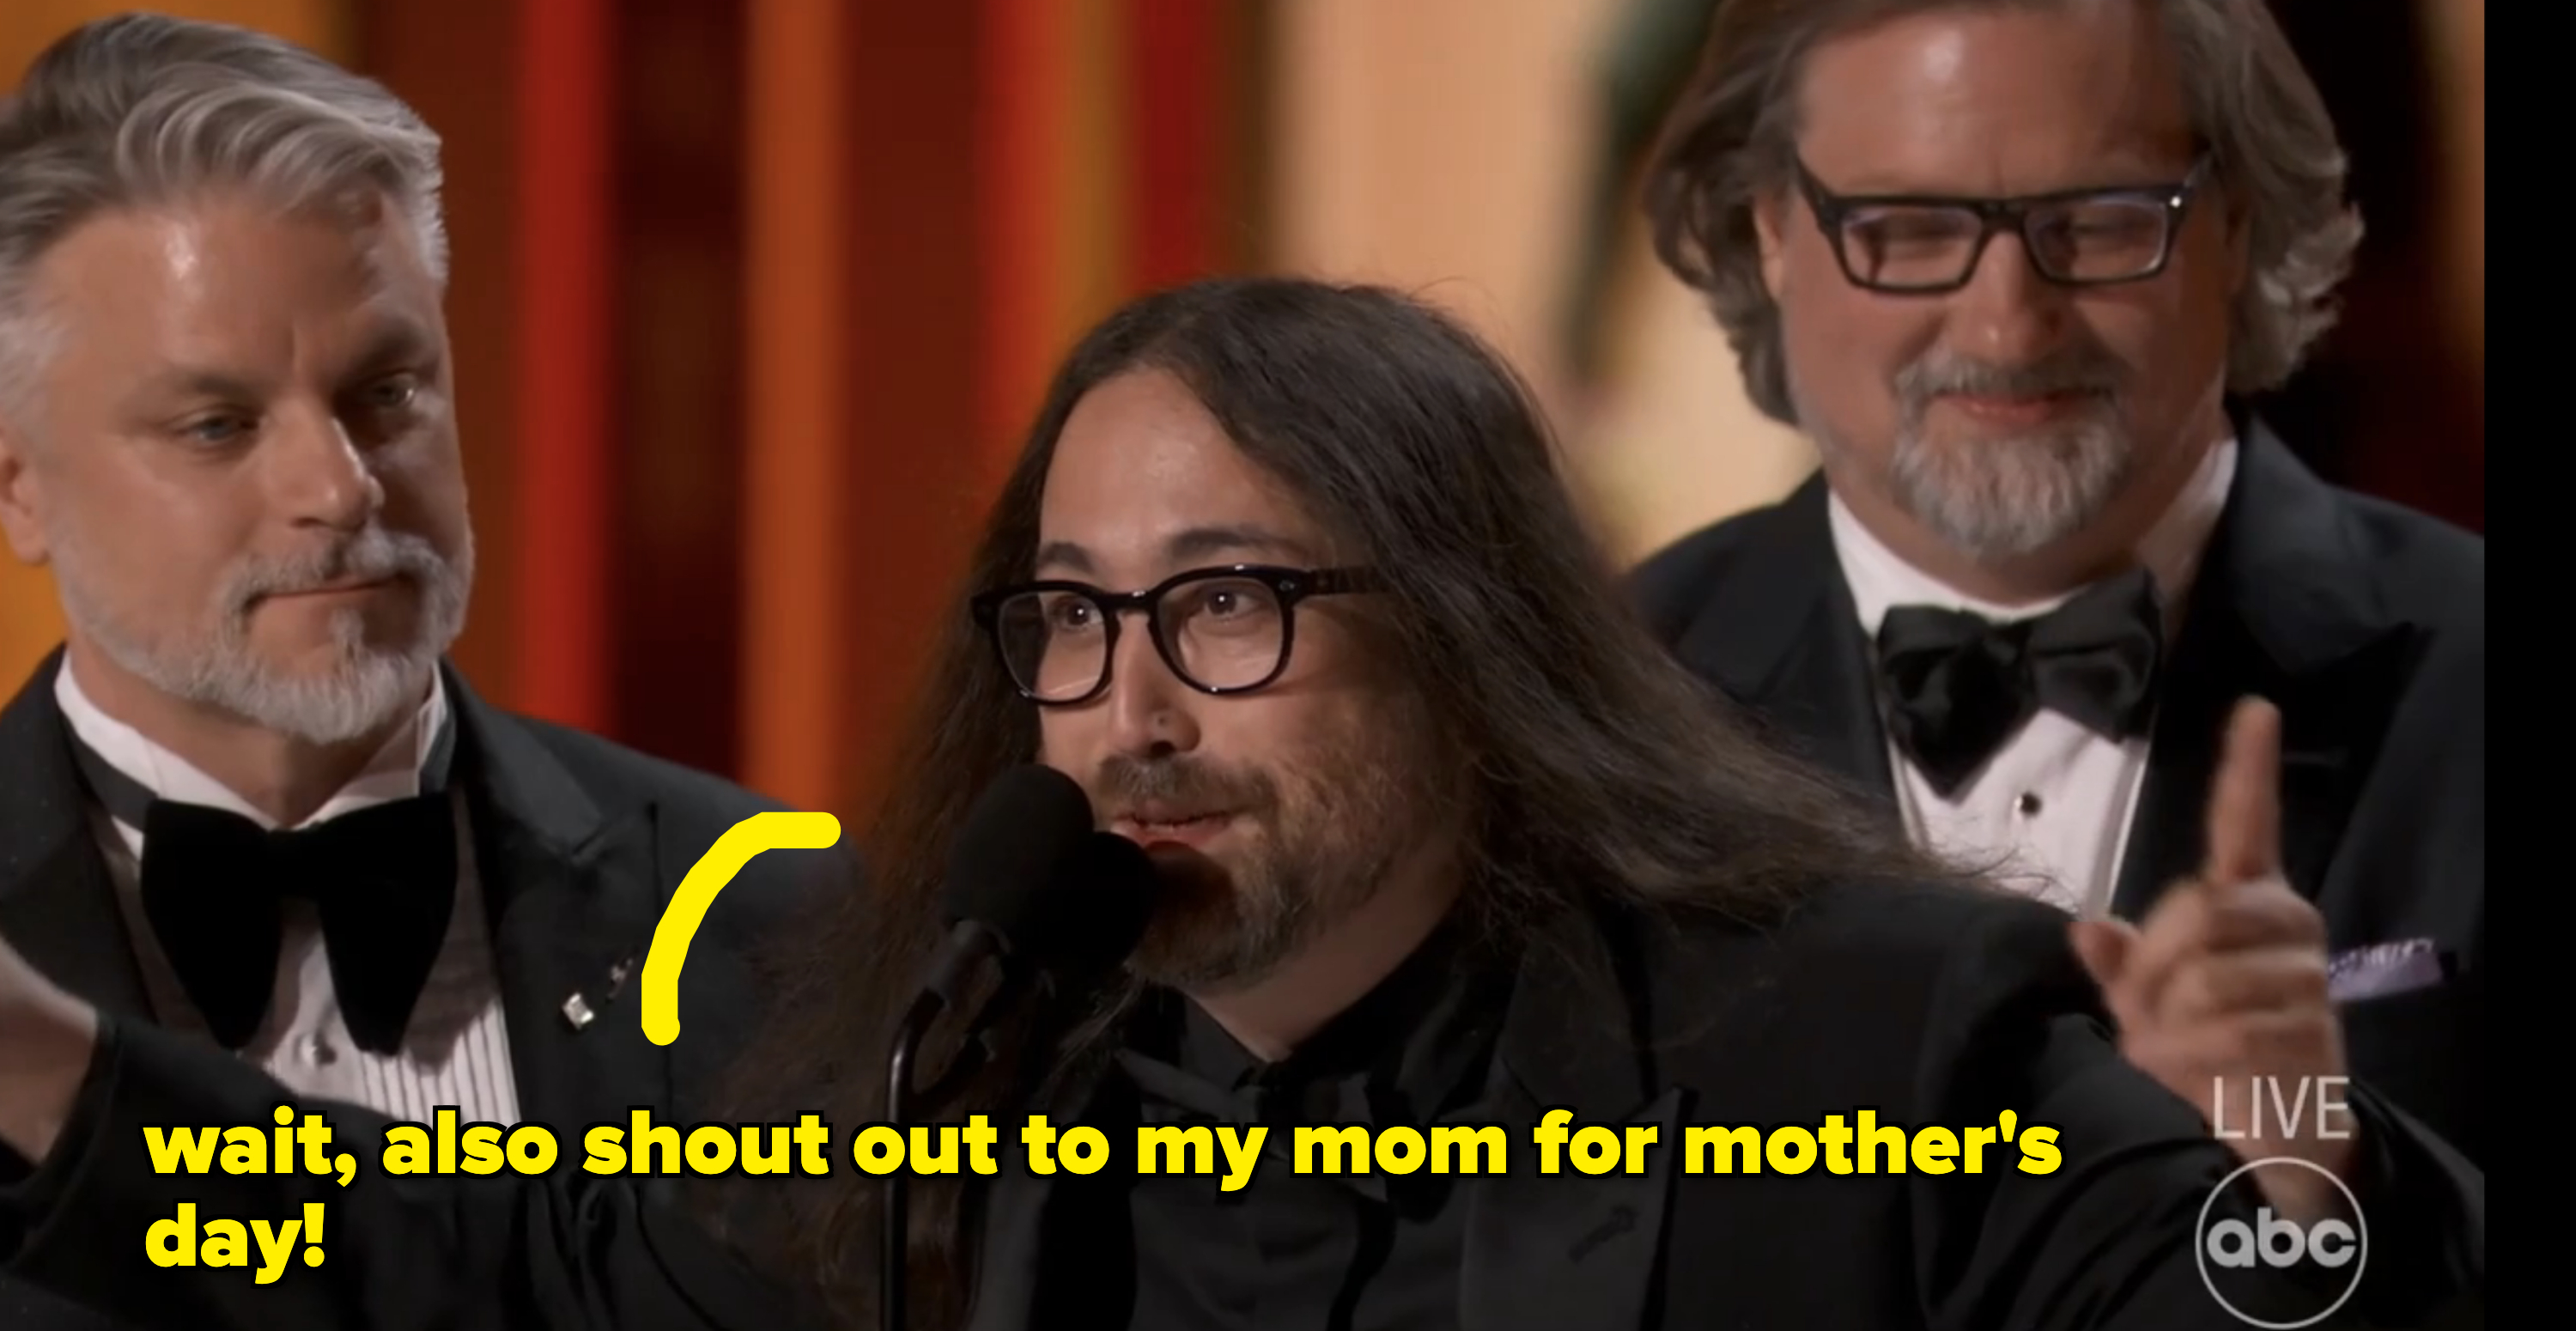 Sean Ono Lennon at the mic at the Oscars